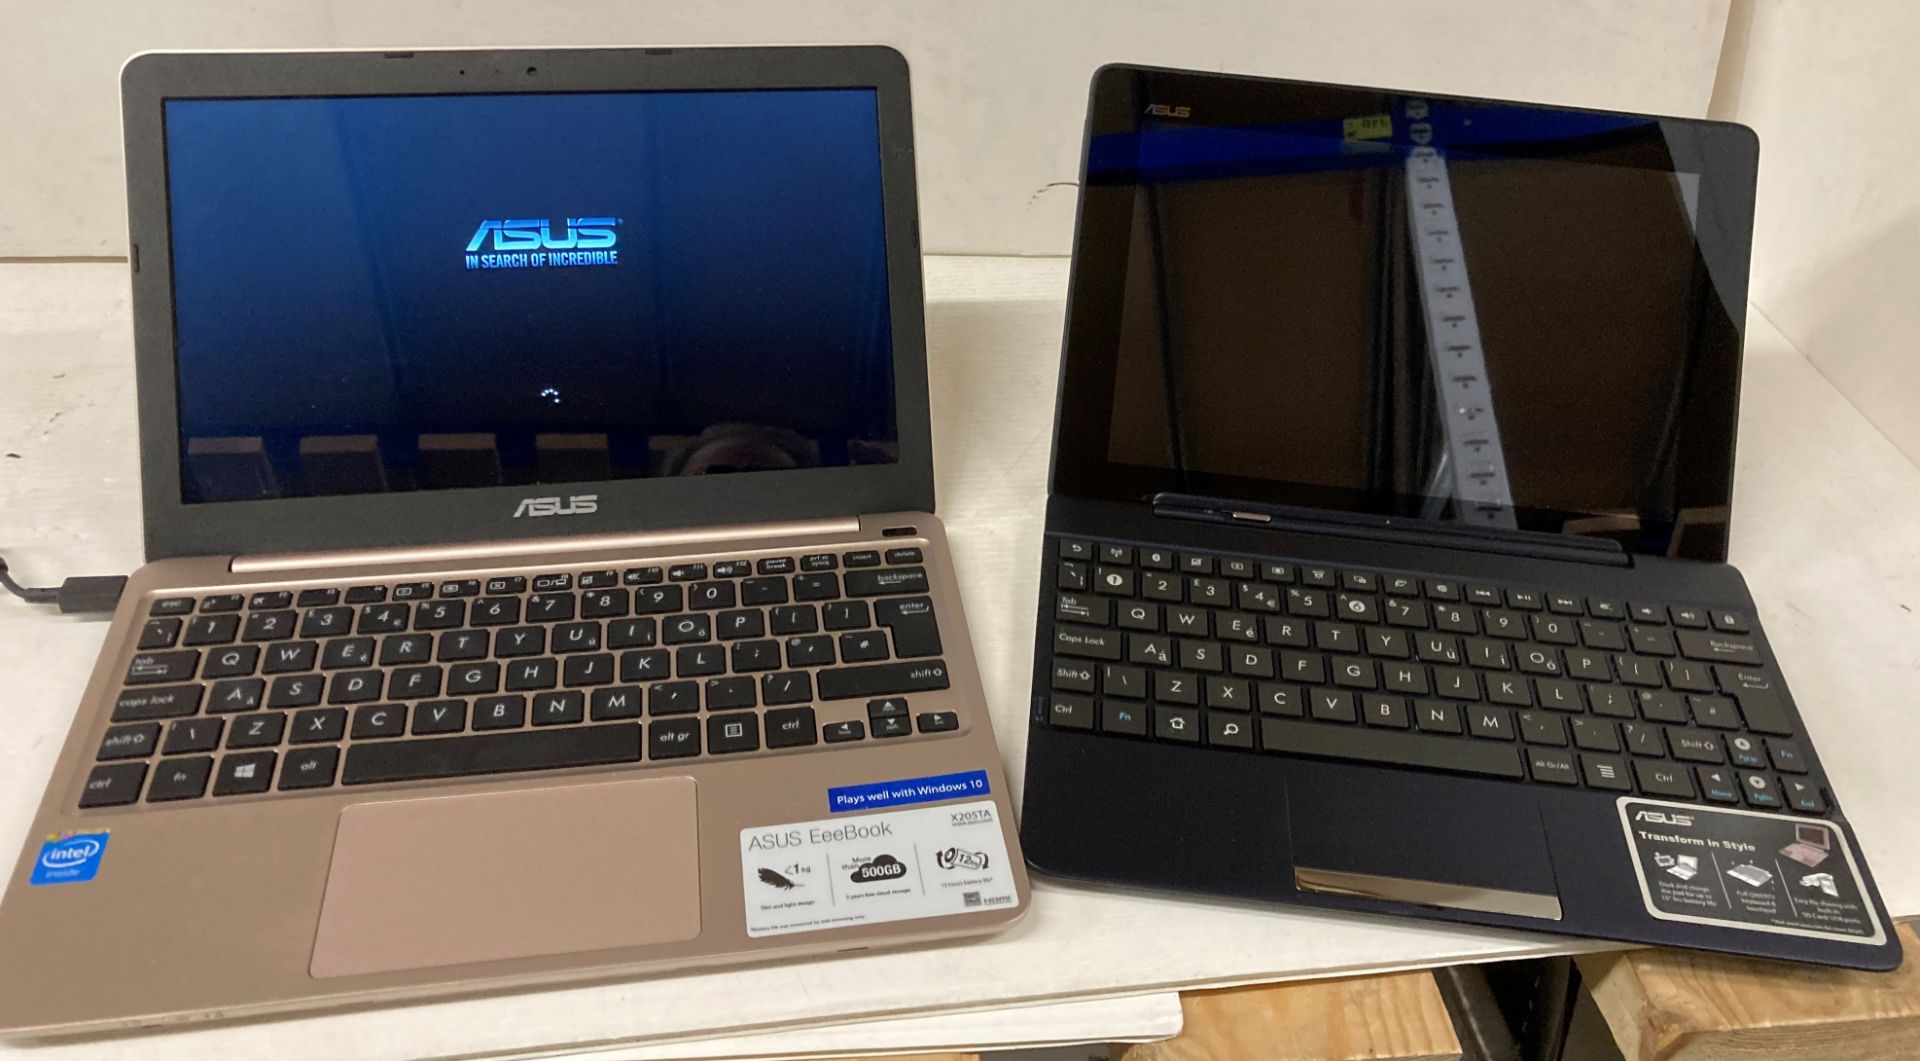 Asus Eeebook complete with power lead and a Asus TF300T tablet in blue (no power lead)